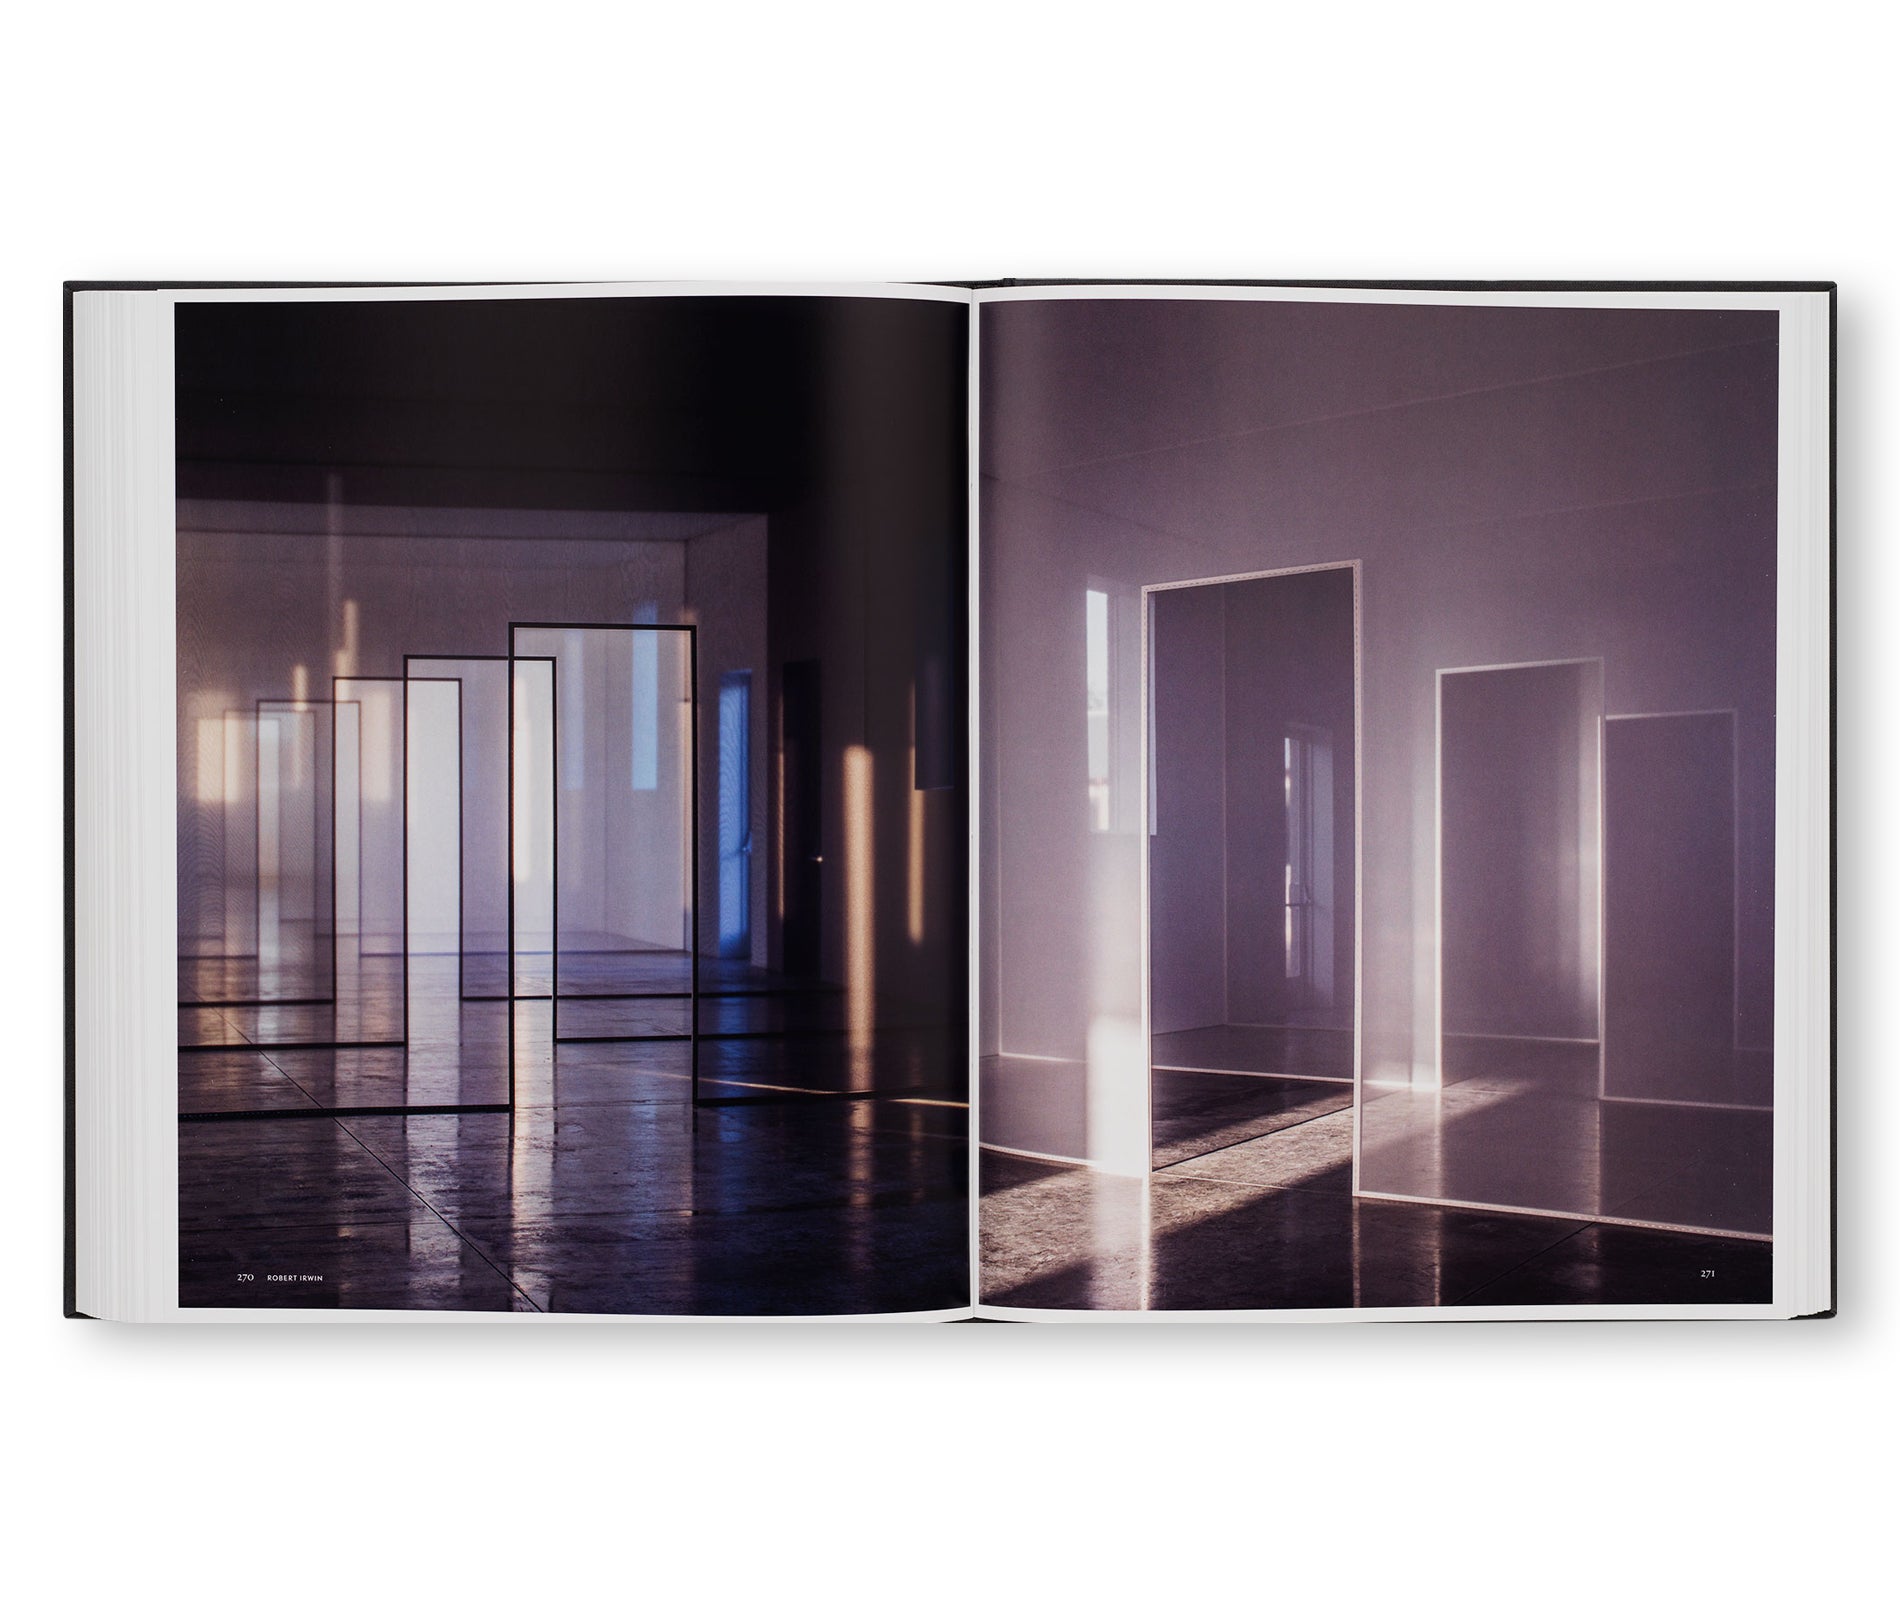 CHINATI: THE VISION OF DONALD JUDD [SECOND EDITION]